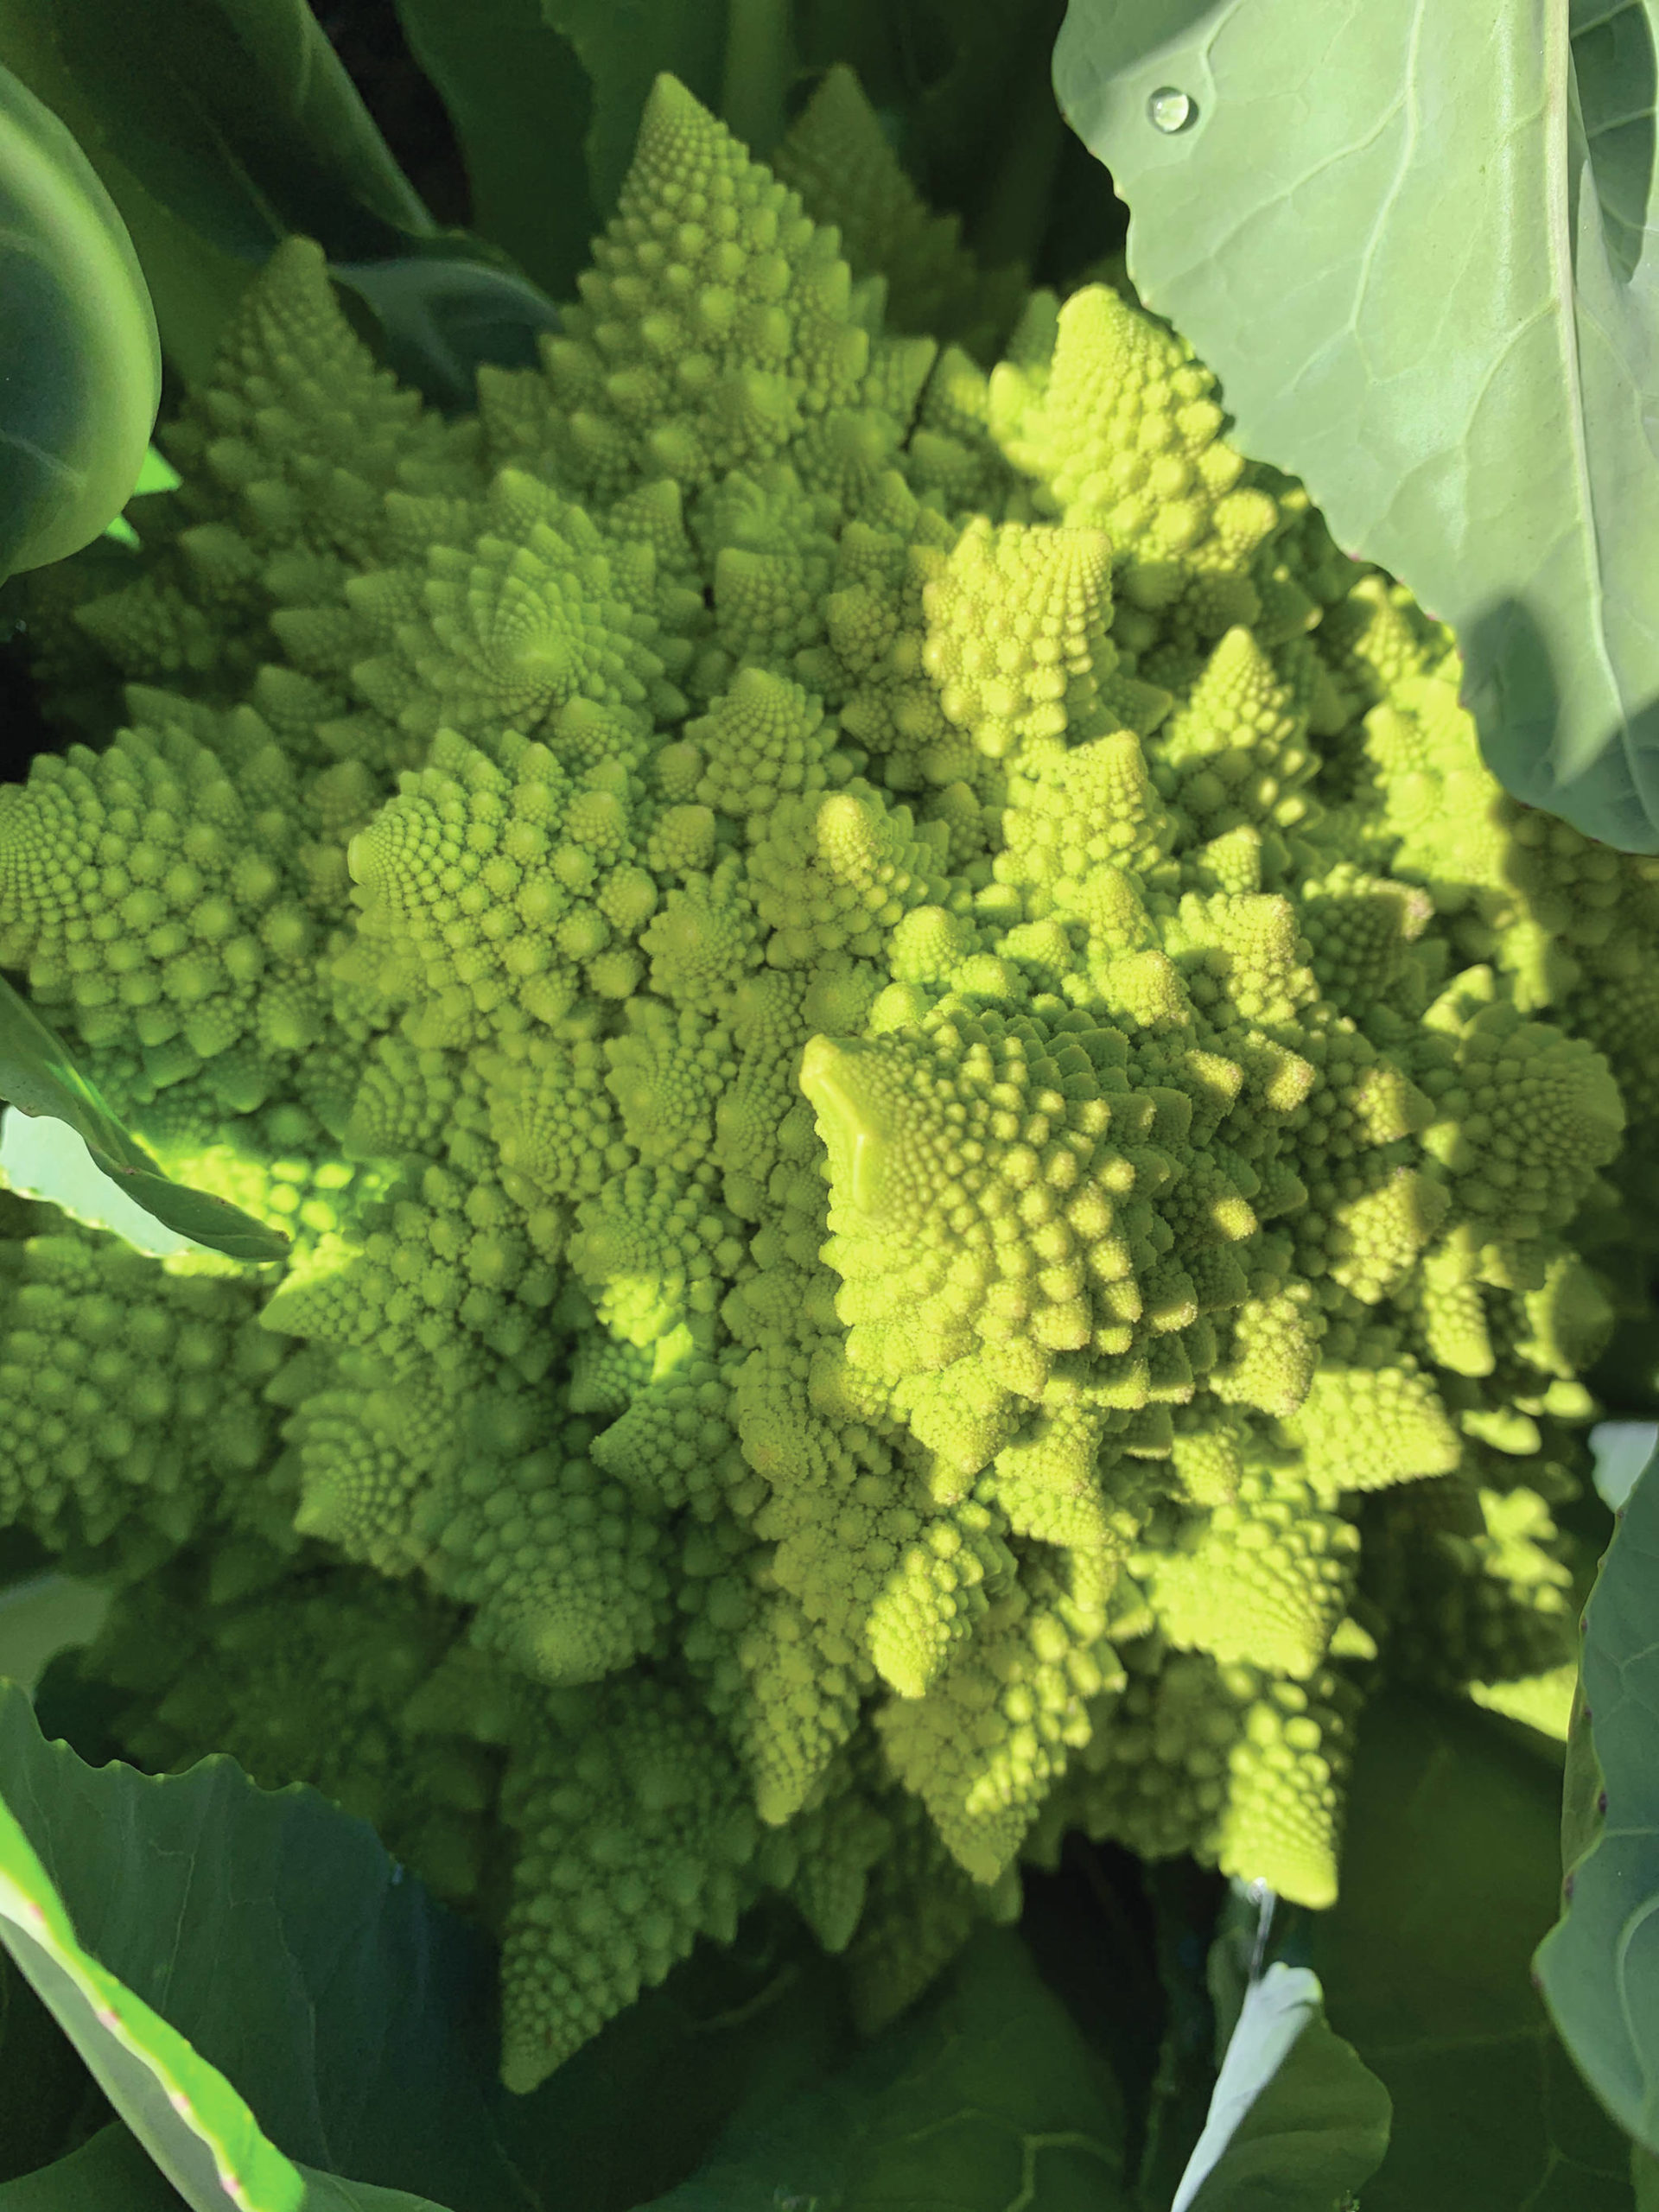 Romanesque cauliflower delights with its complicated spirals on July 26, 2020, at the Kachemak Gardener’s garden in Homer, Alaska. (Photo by Rosemary Fitzpatrick)